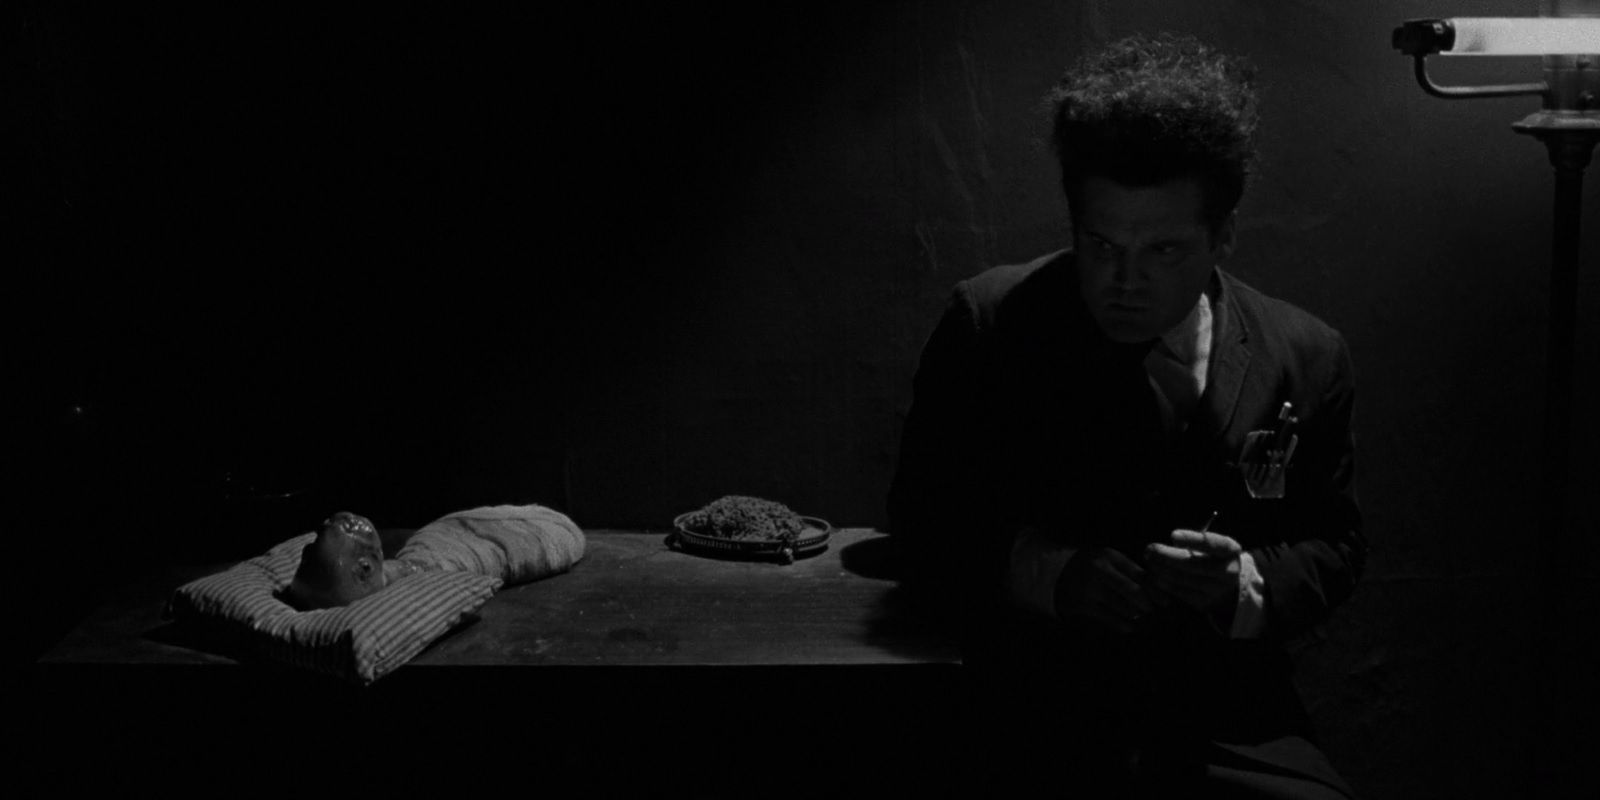 Henry sits next to his baby in Eraserhead